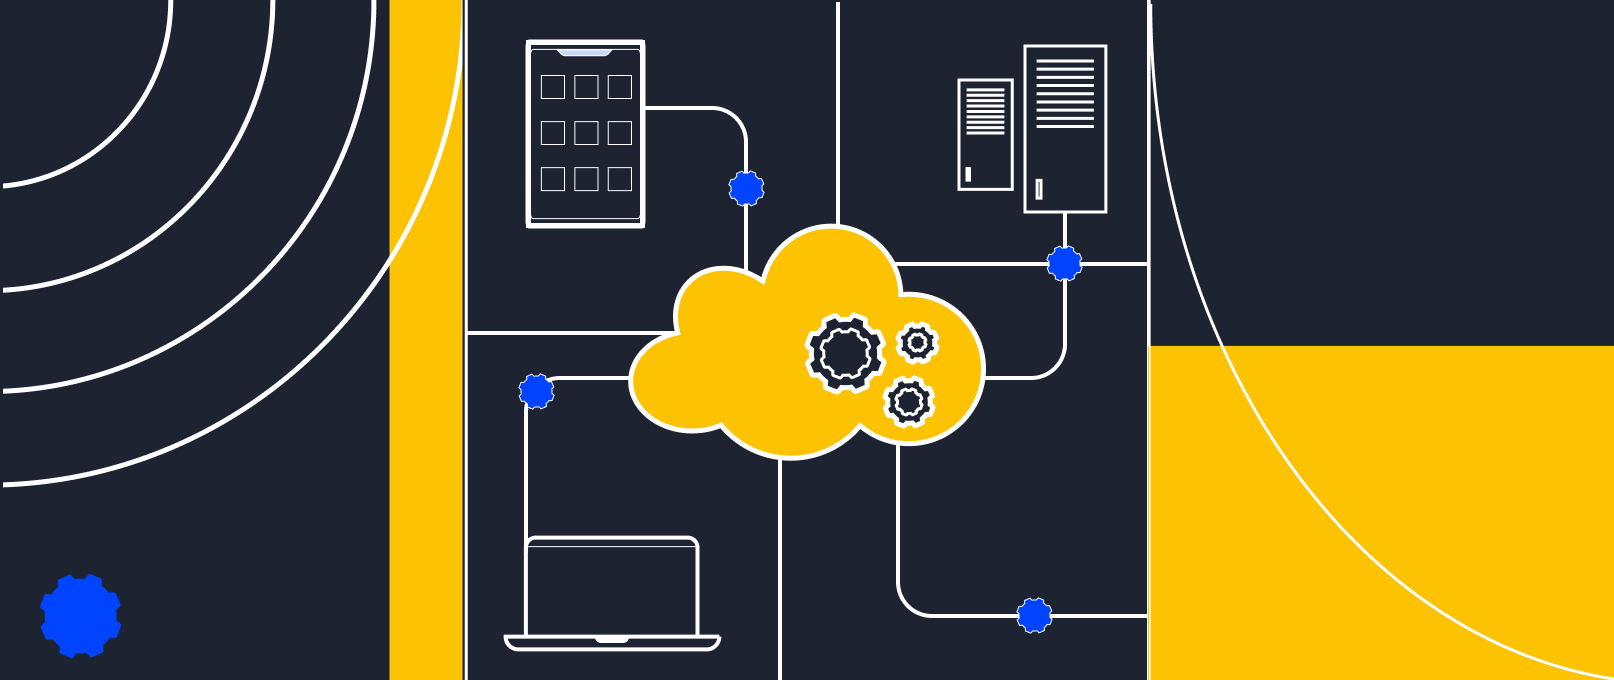 What are cloud services?